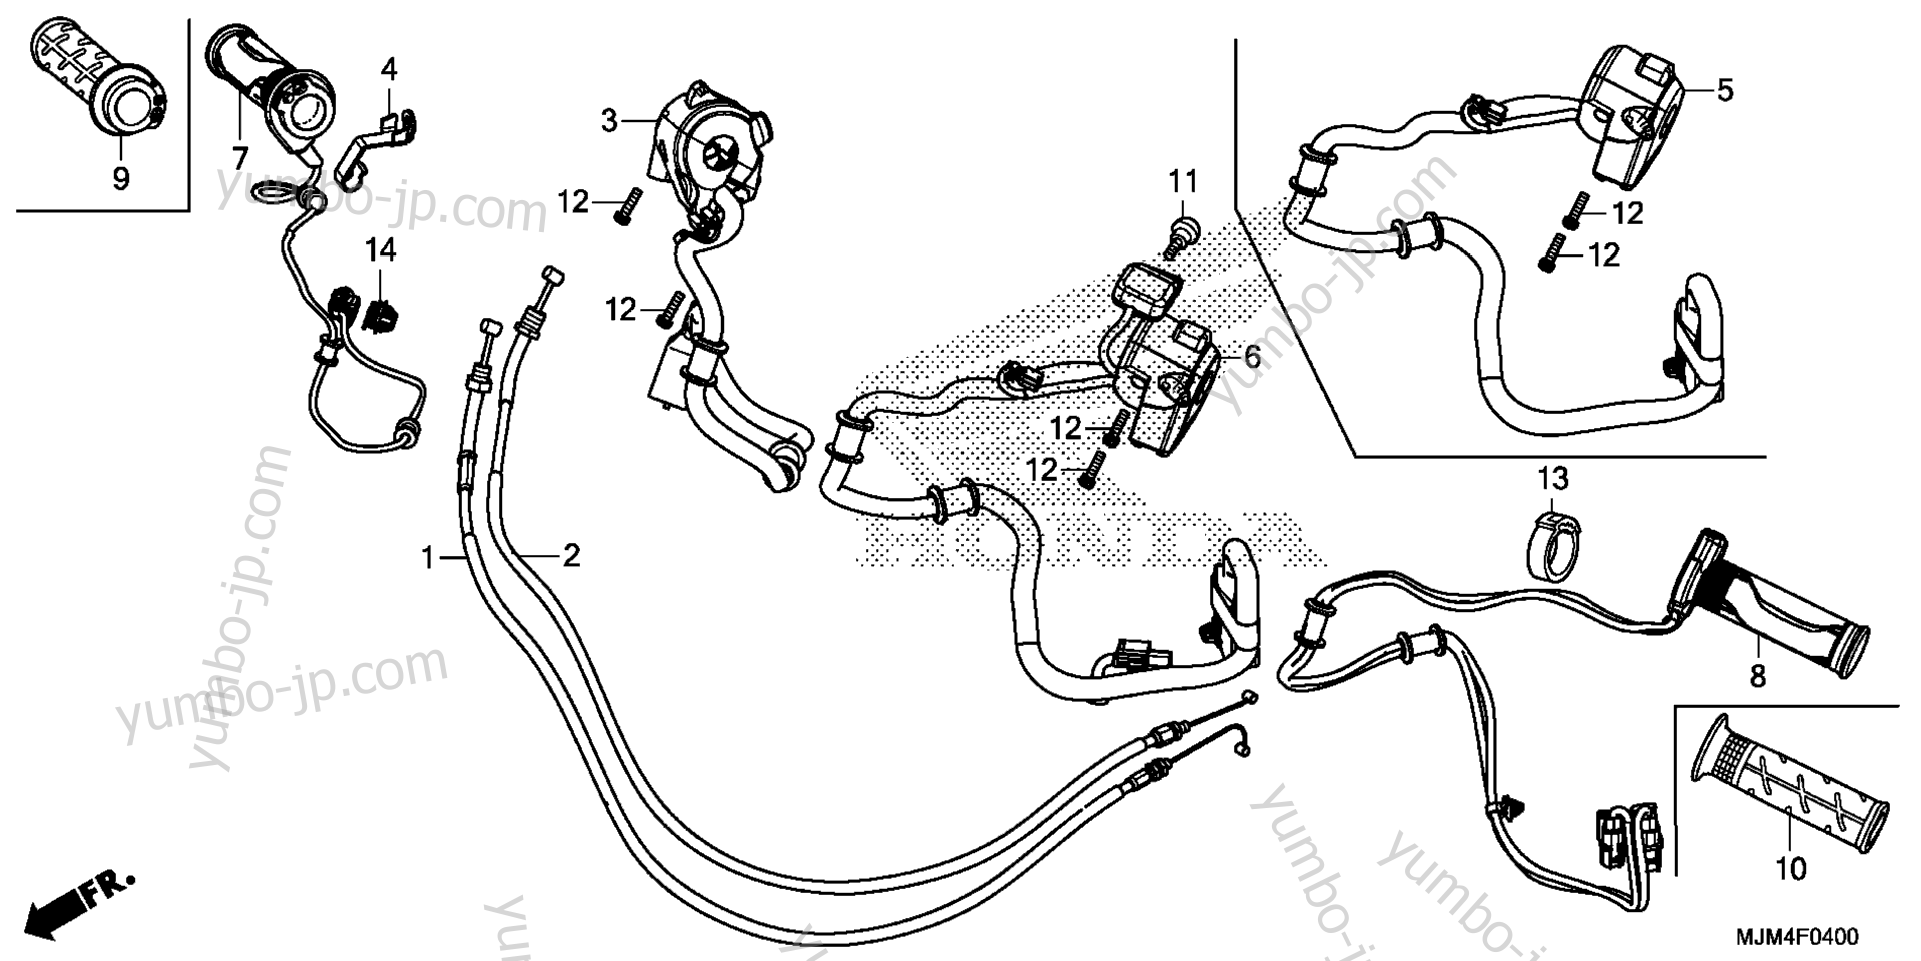 SWITCH / CABLE for motorcycles HONDA VFR800F 2AC 2014 year